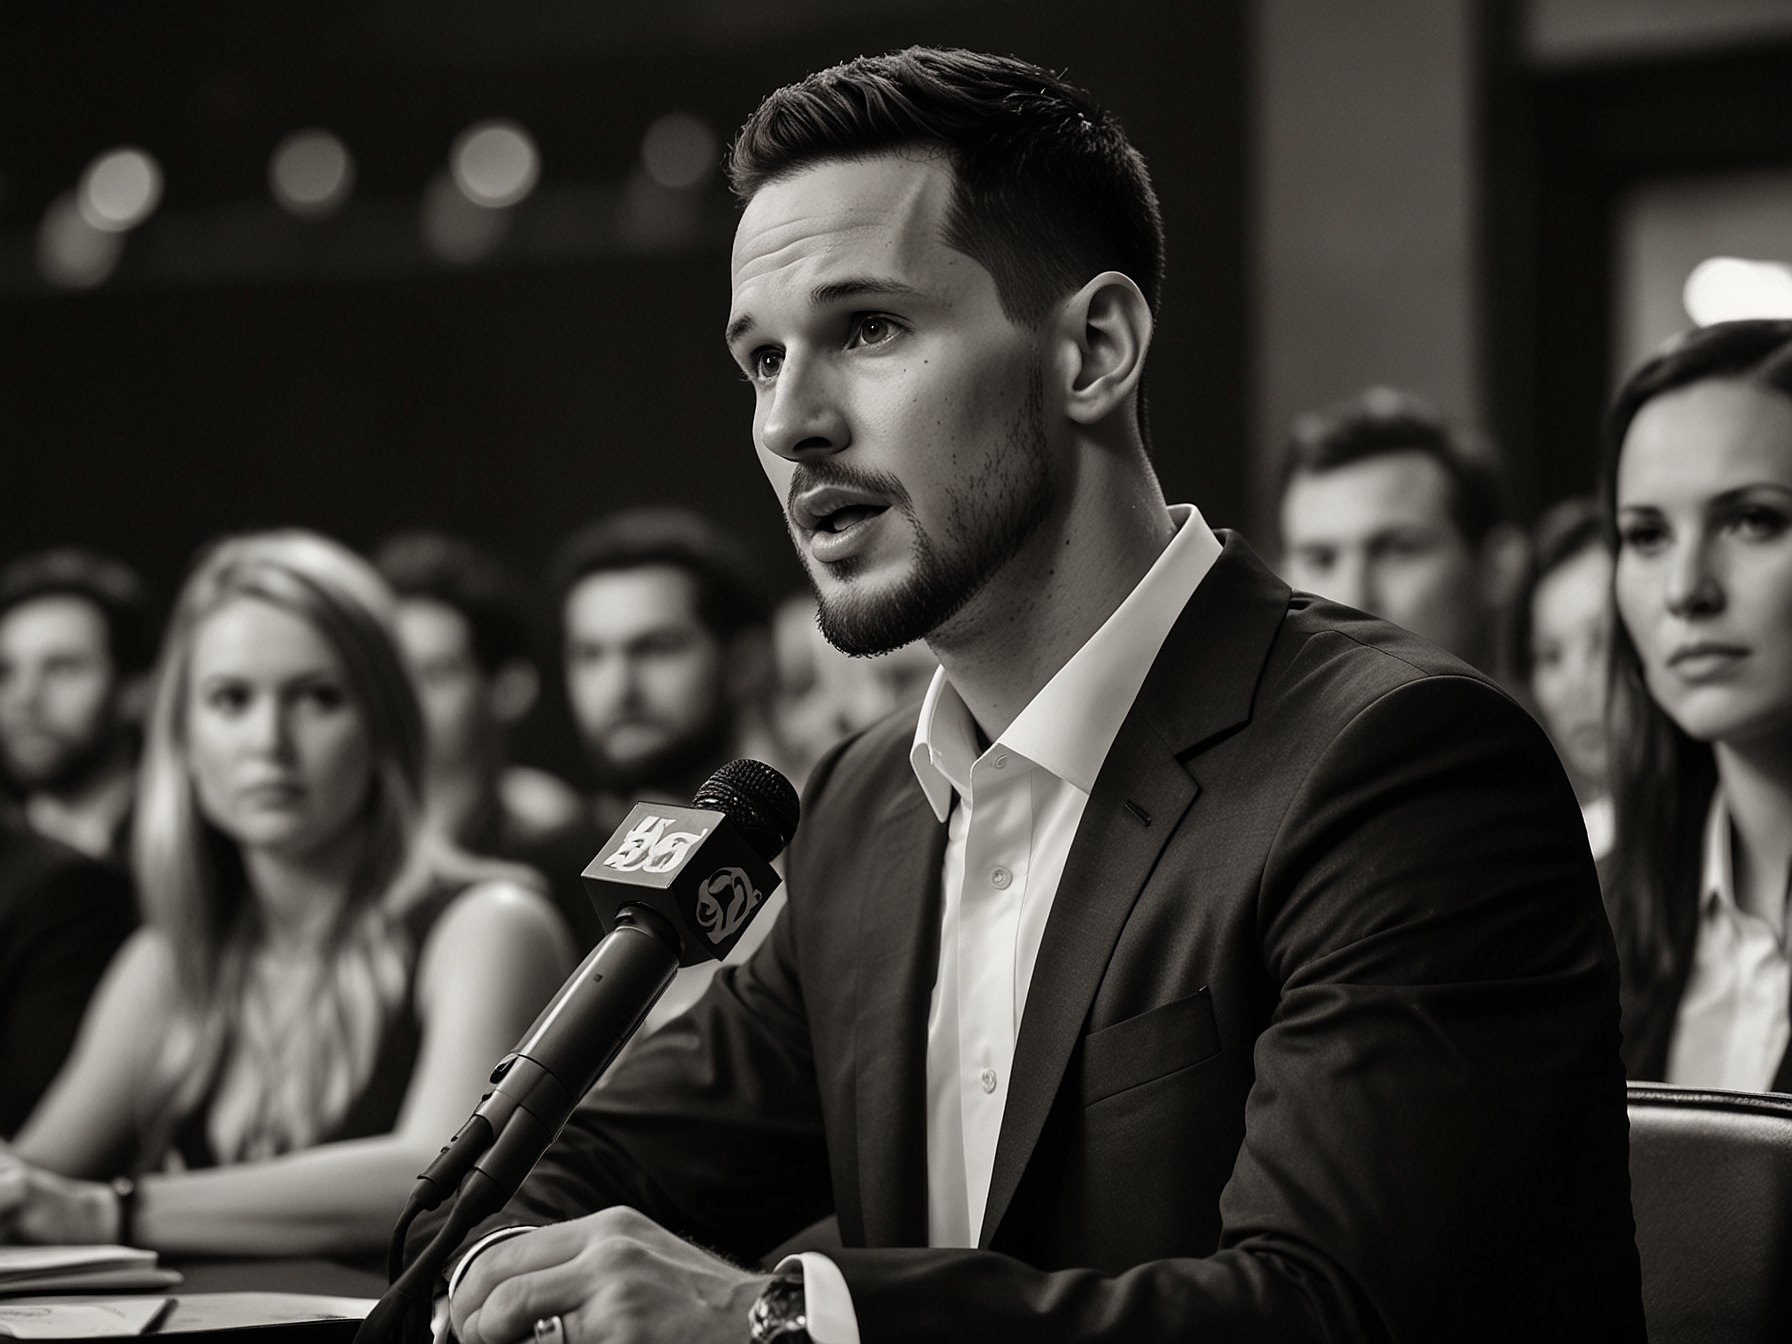 An image capturing JJ Redick speaking at the Lakers press conference, with audience members visibly reacting to his comments about LeBron James, highlighting the moment of collective groaning.